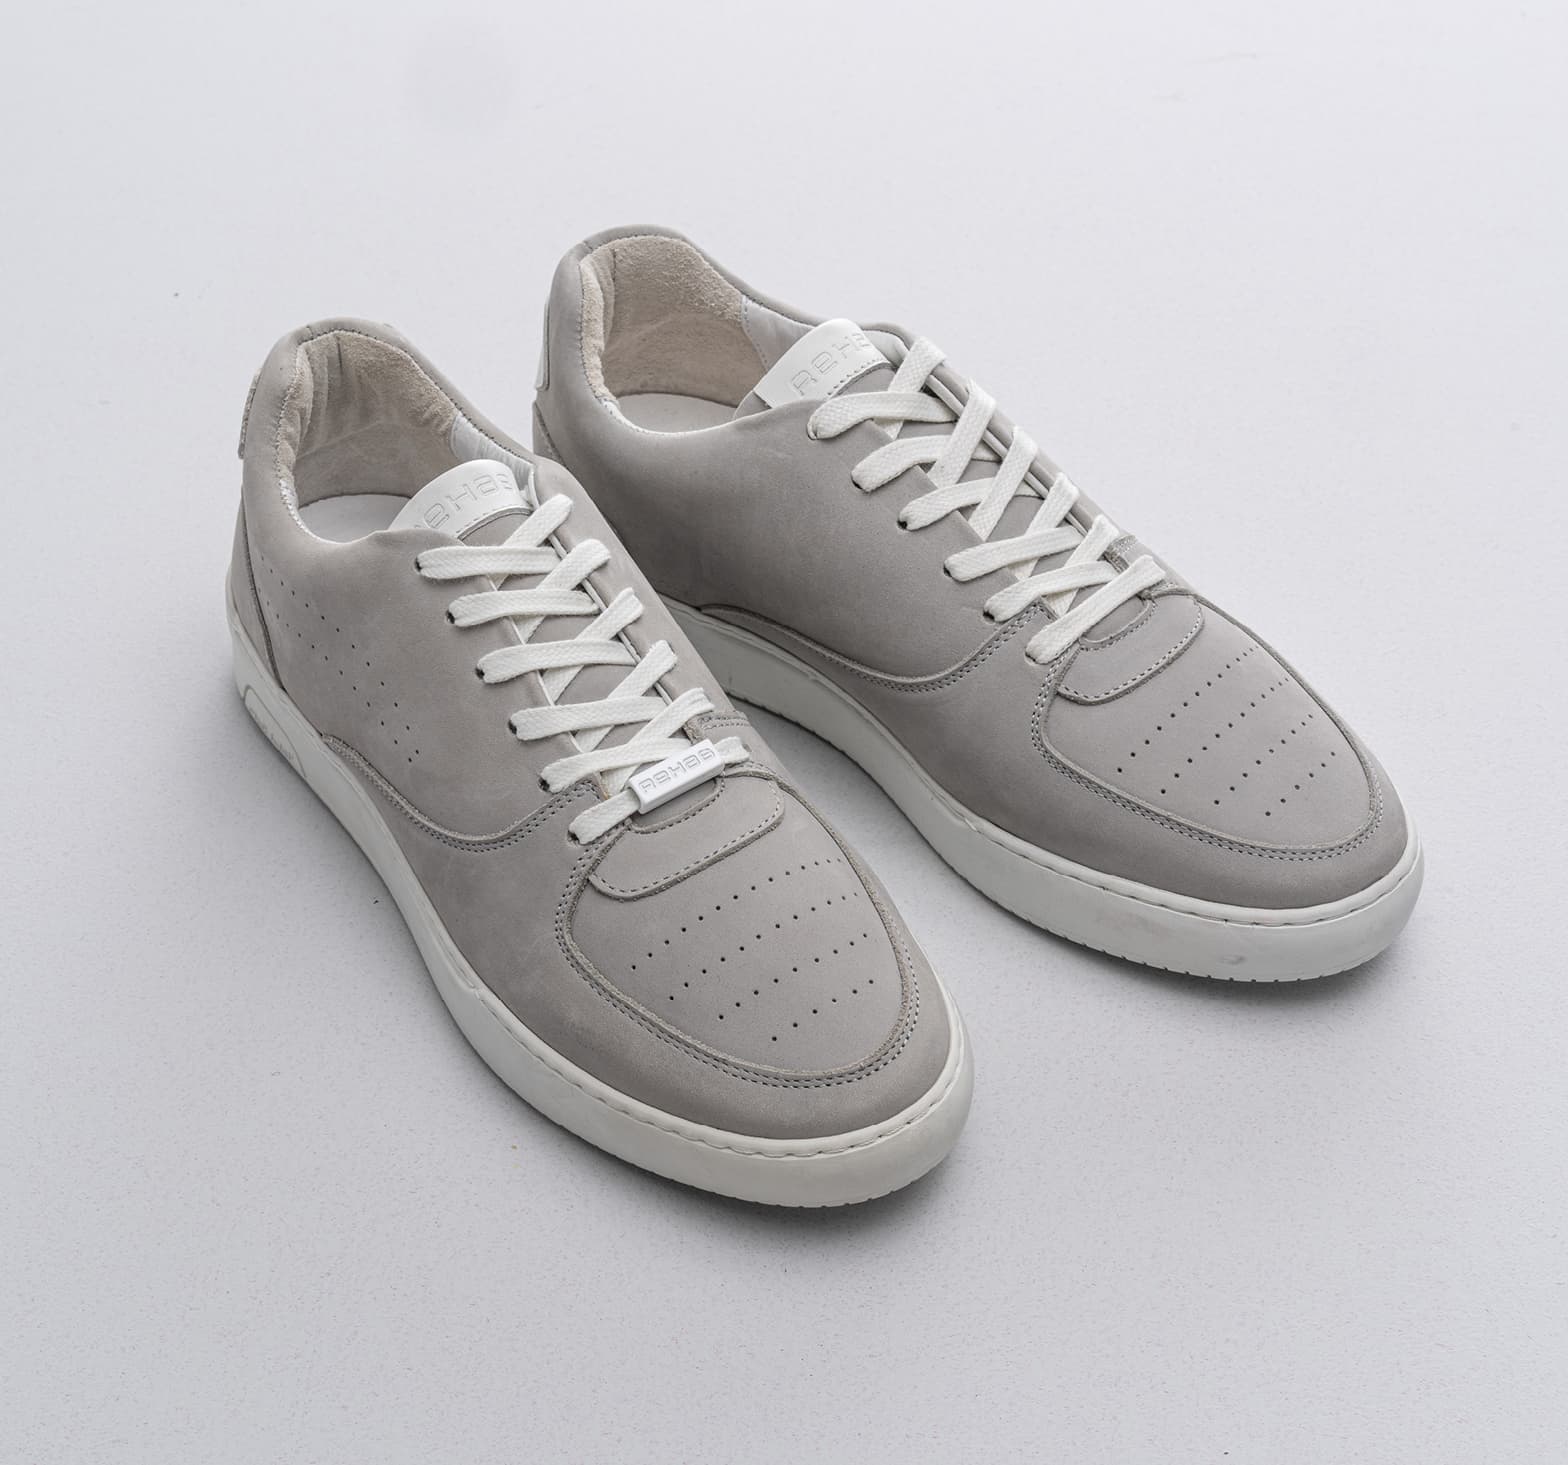 REHAB Footwear - Official Rehab Footwear Store - Classic shoes, Casual ...